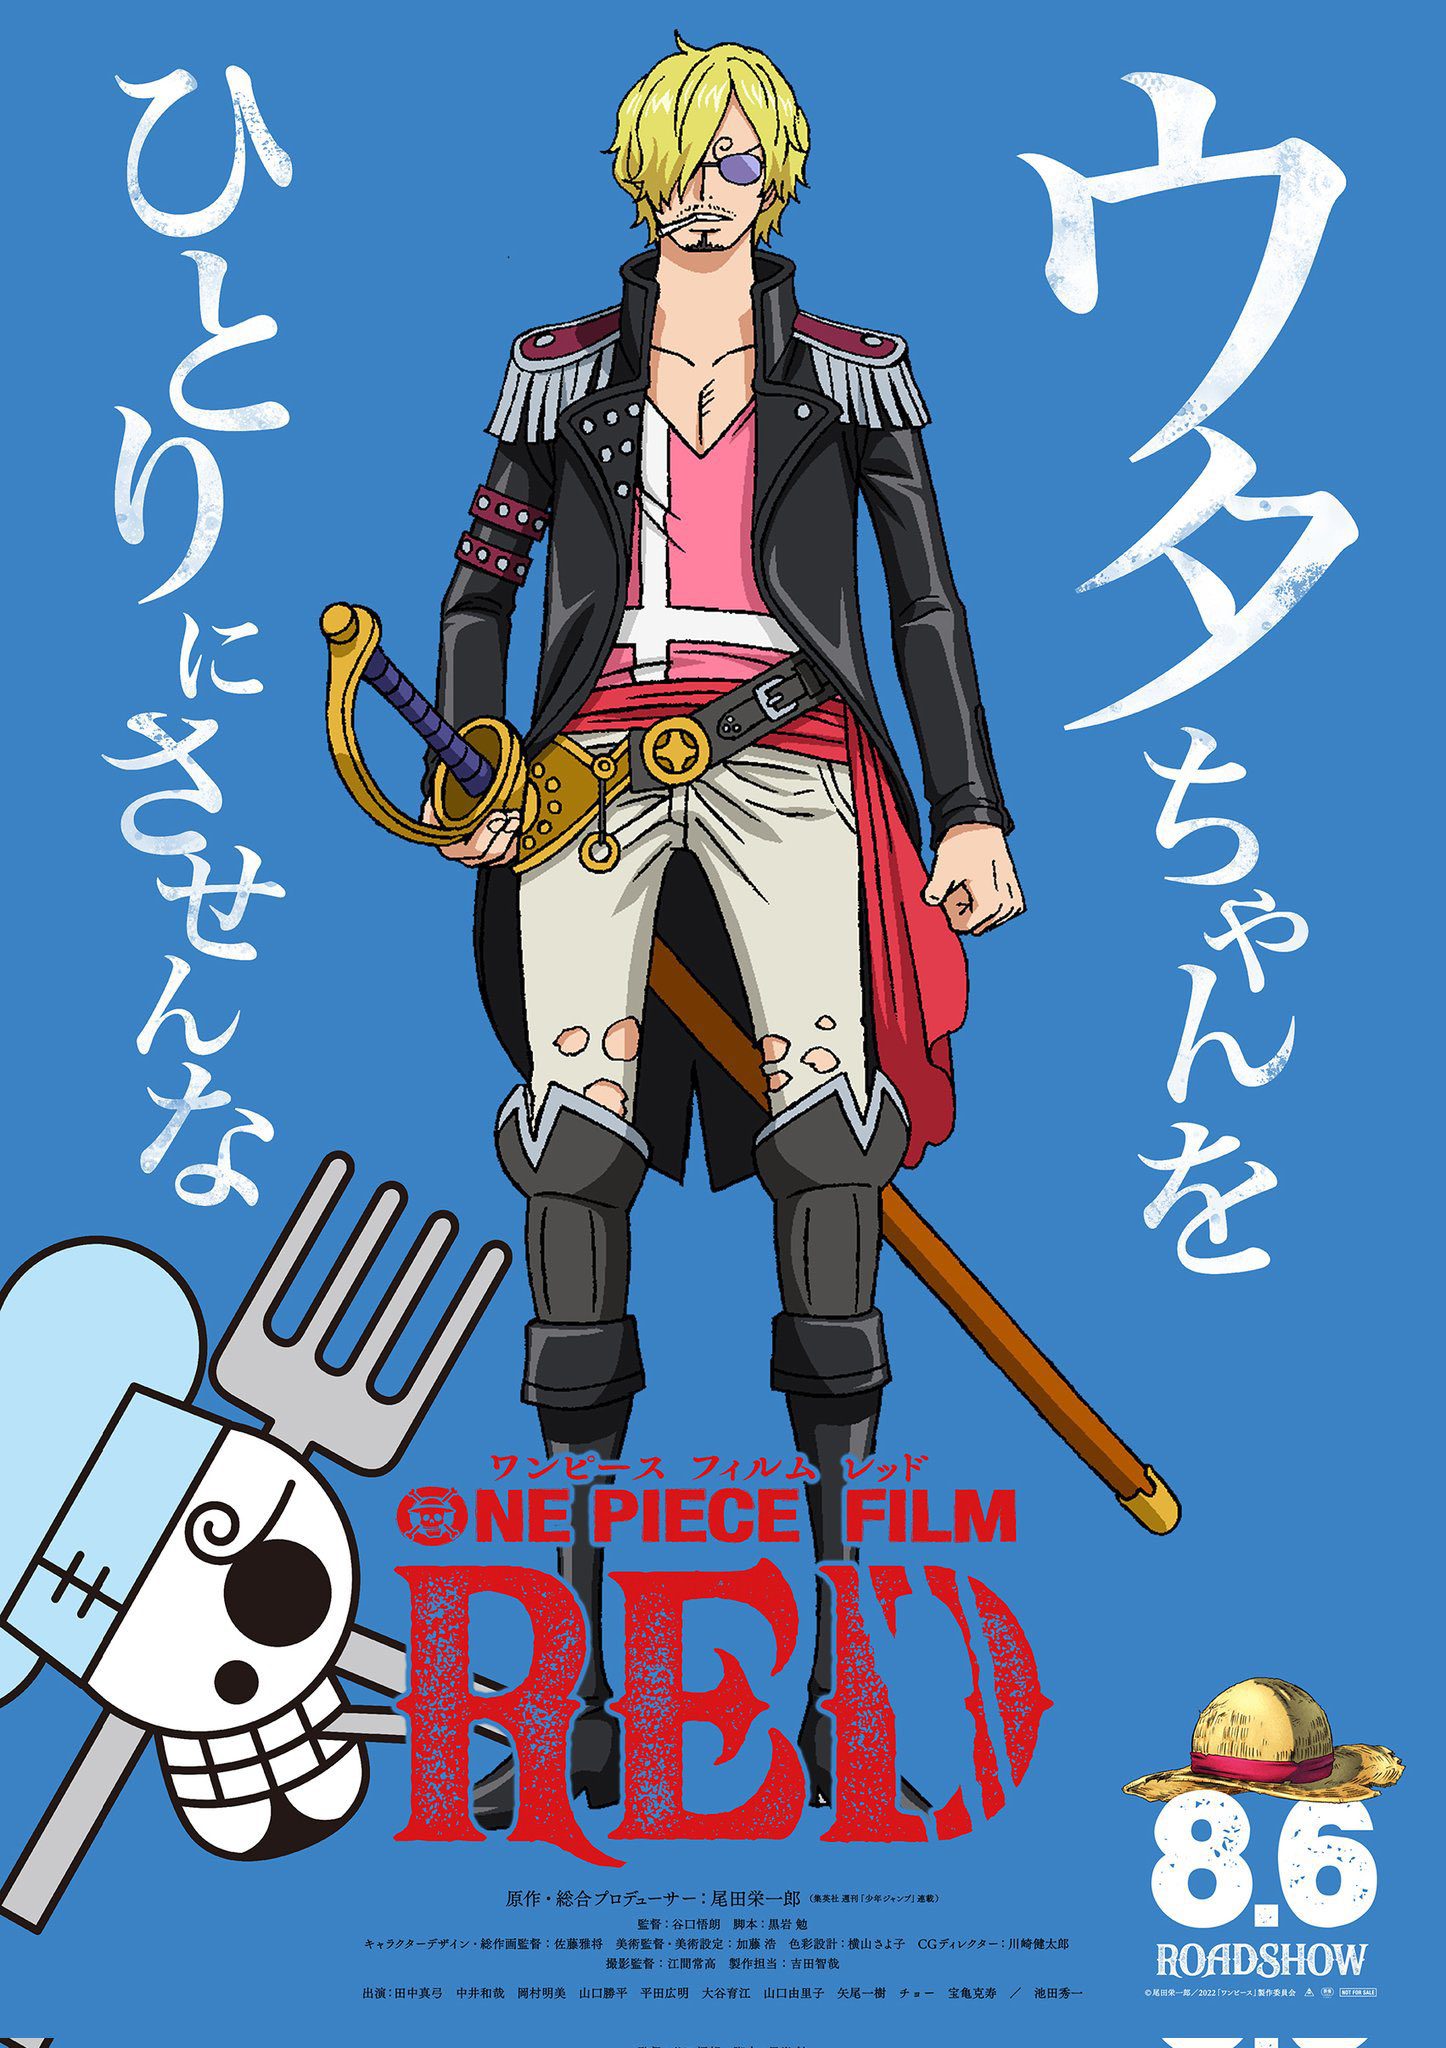 Sanji's new visuals for One Pice Film Red